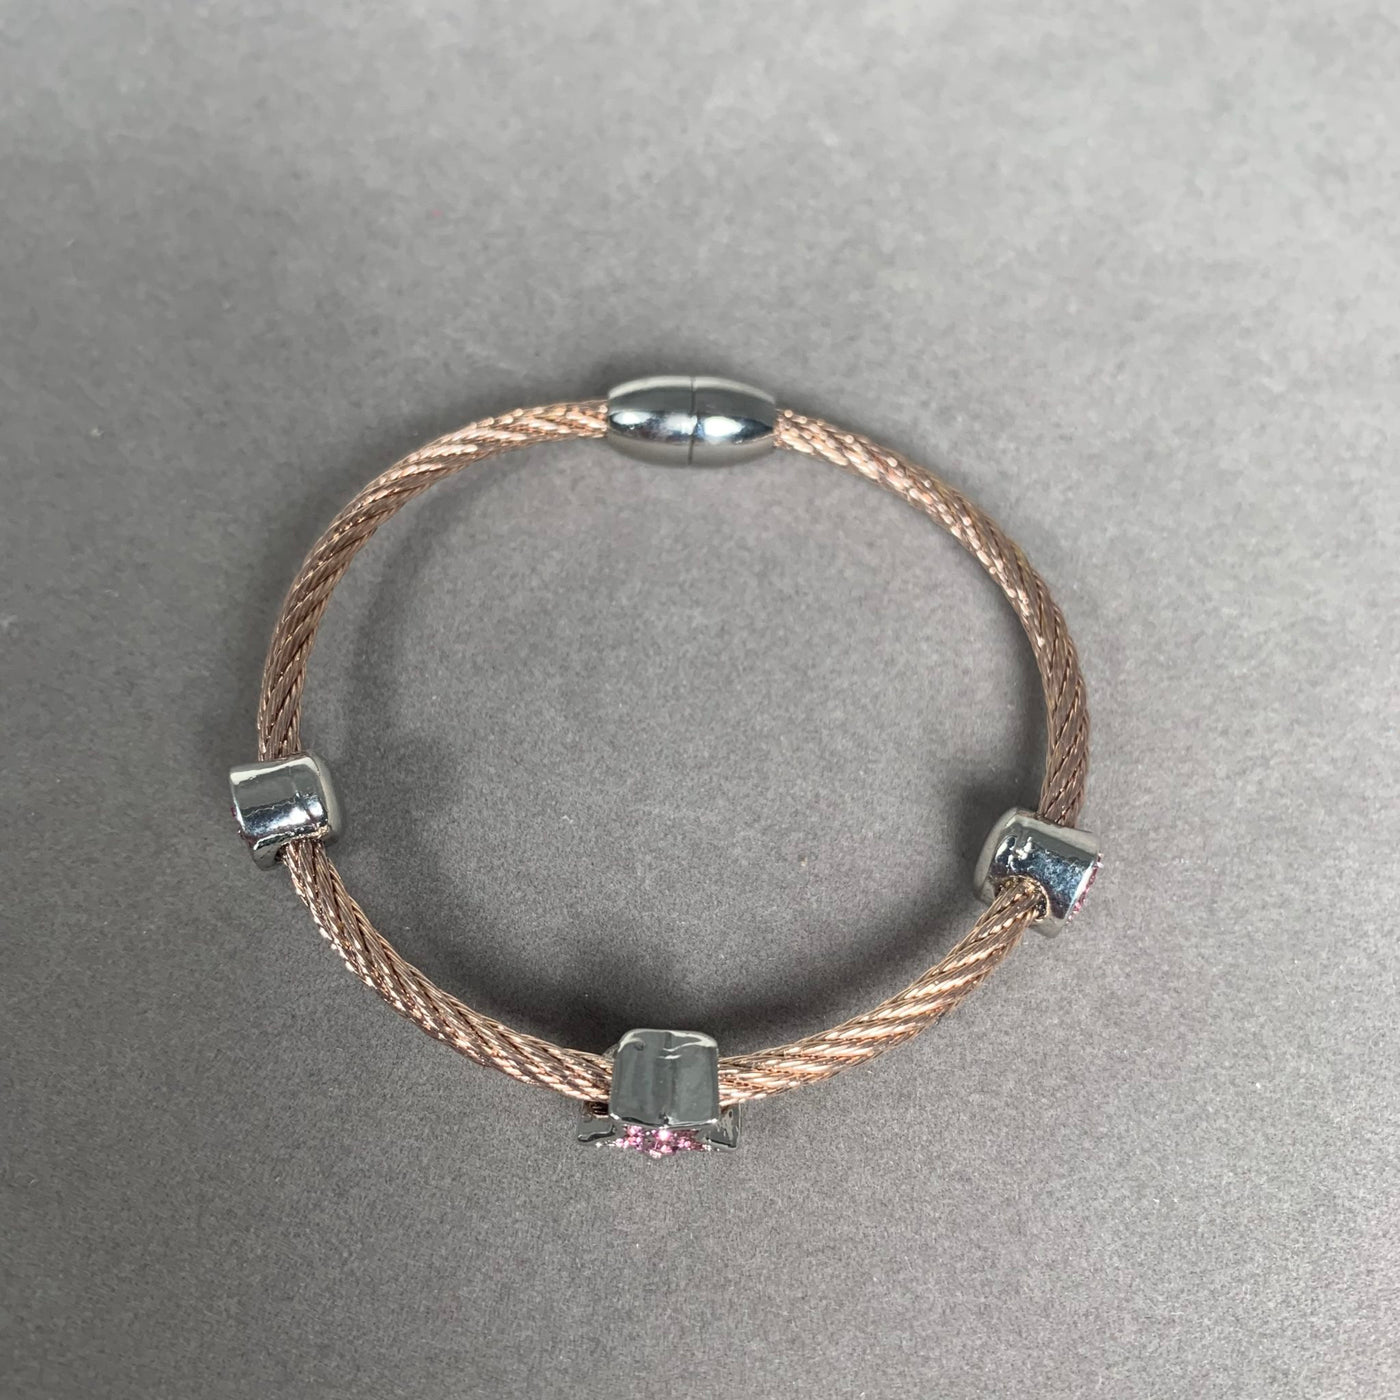 Rose Gold Tone Wire Bangle Bracelet with 3 Clear Pave Crystal Motifs